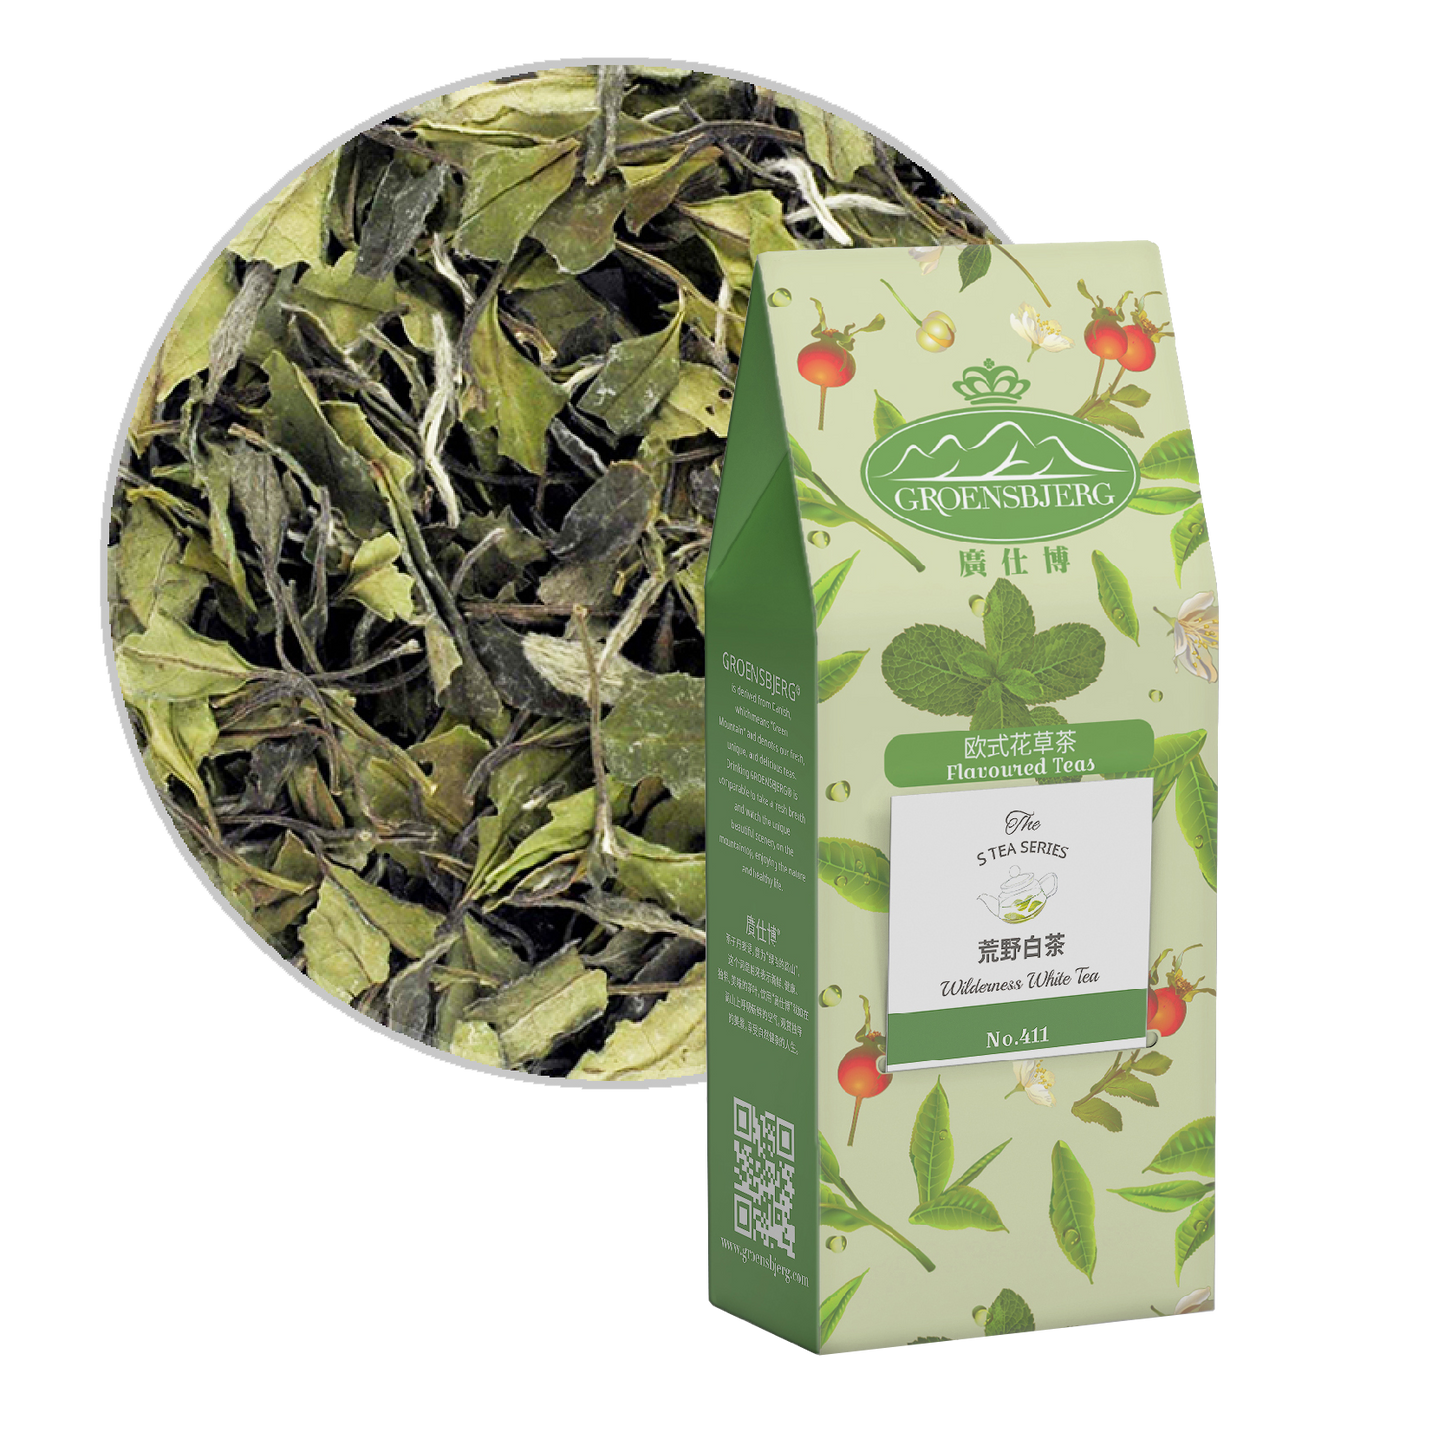 Wilderness White Tea 38g Pouch Box with Loose Tea